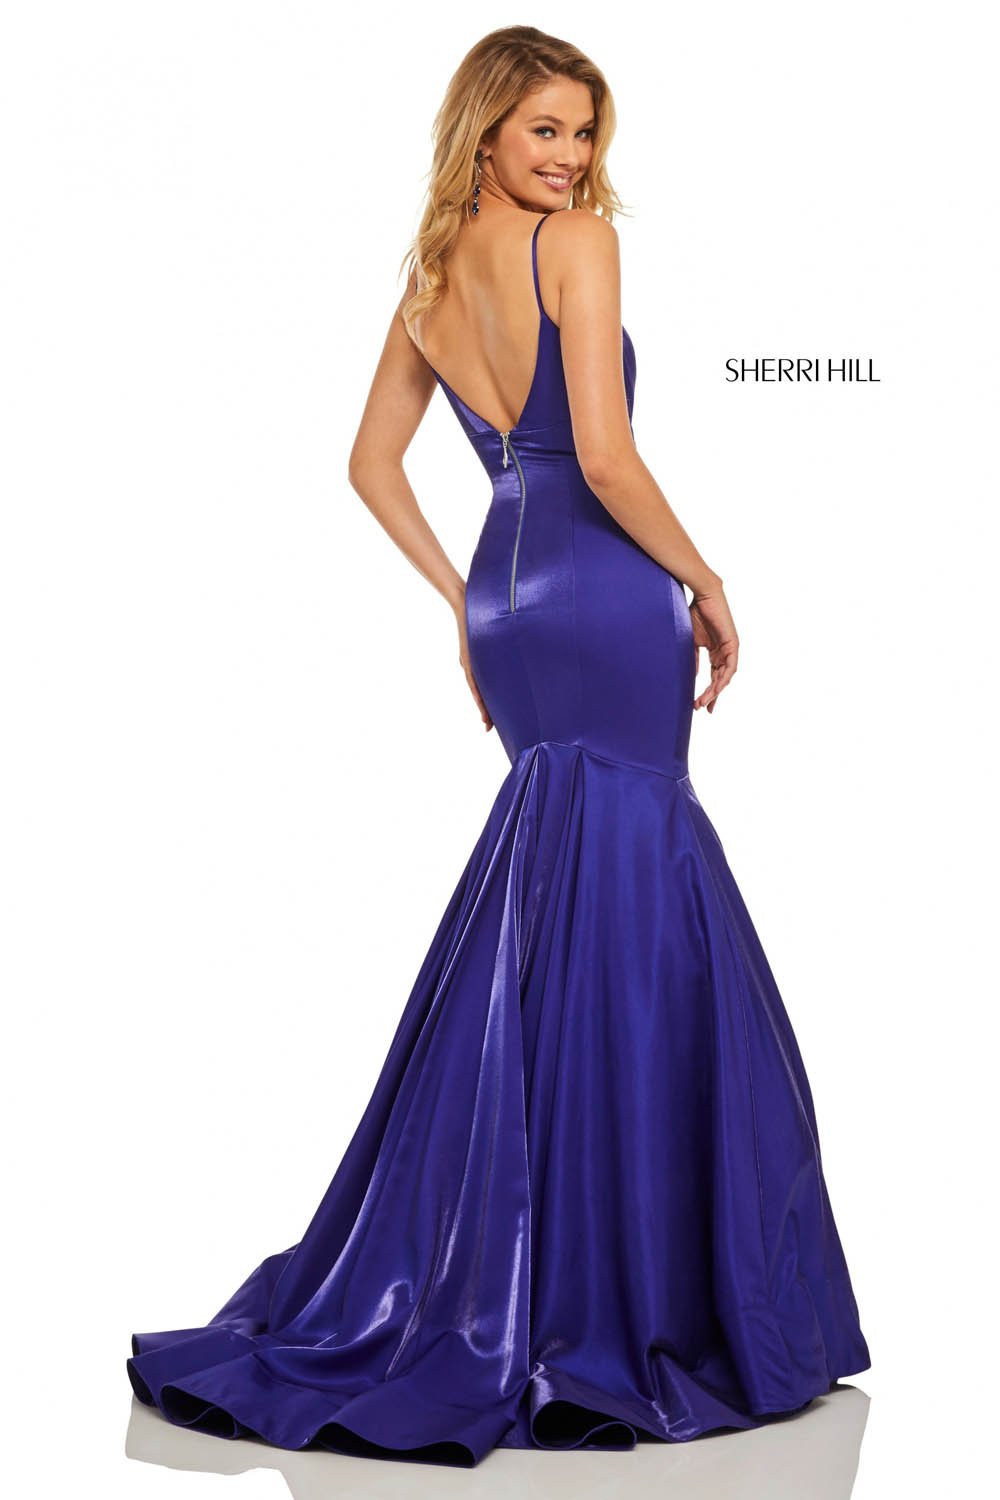 Sherri Hill 52696 dress images in these colors: Dark Purple, Wine, Royal, Teal.